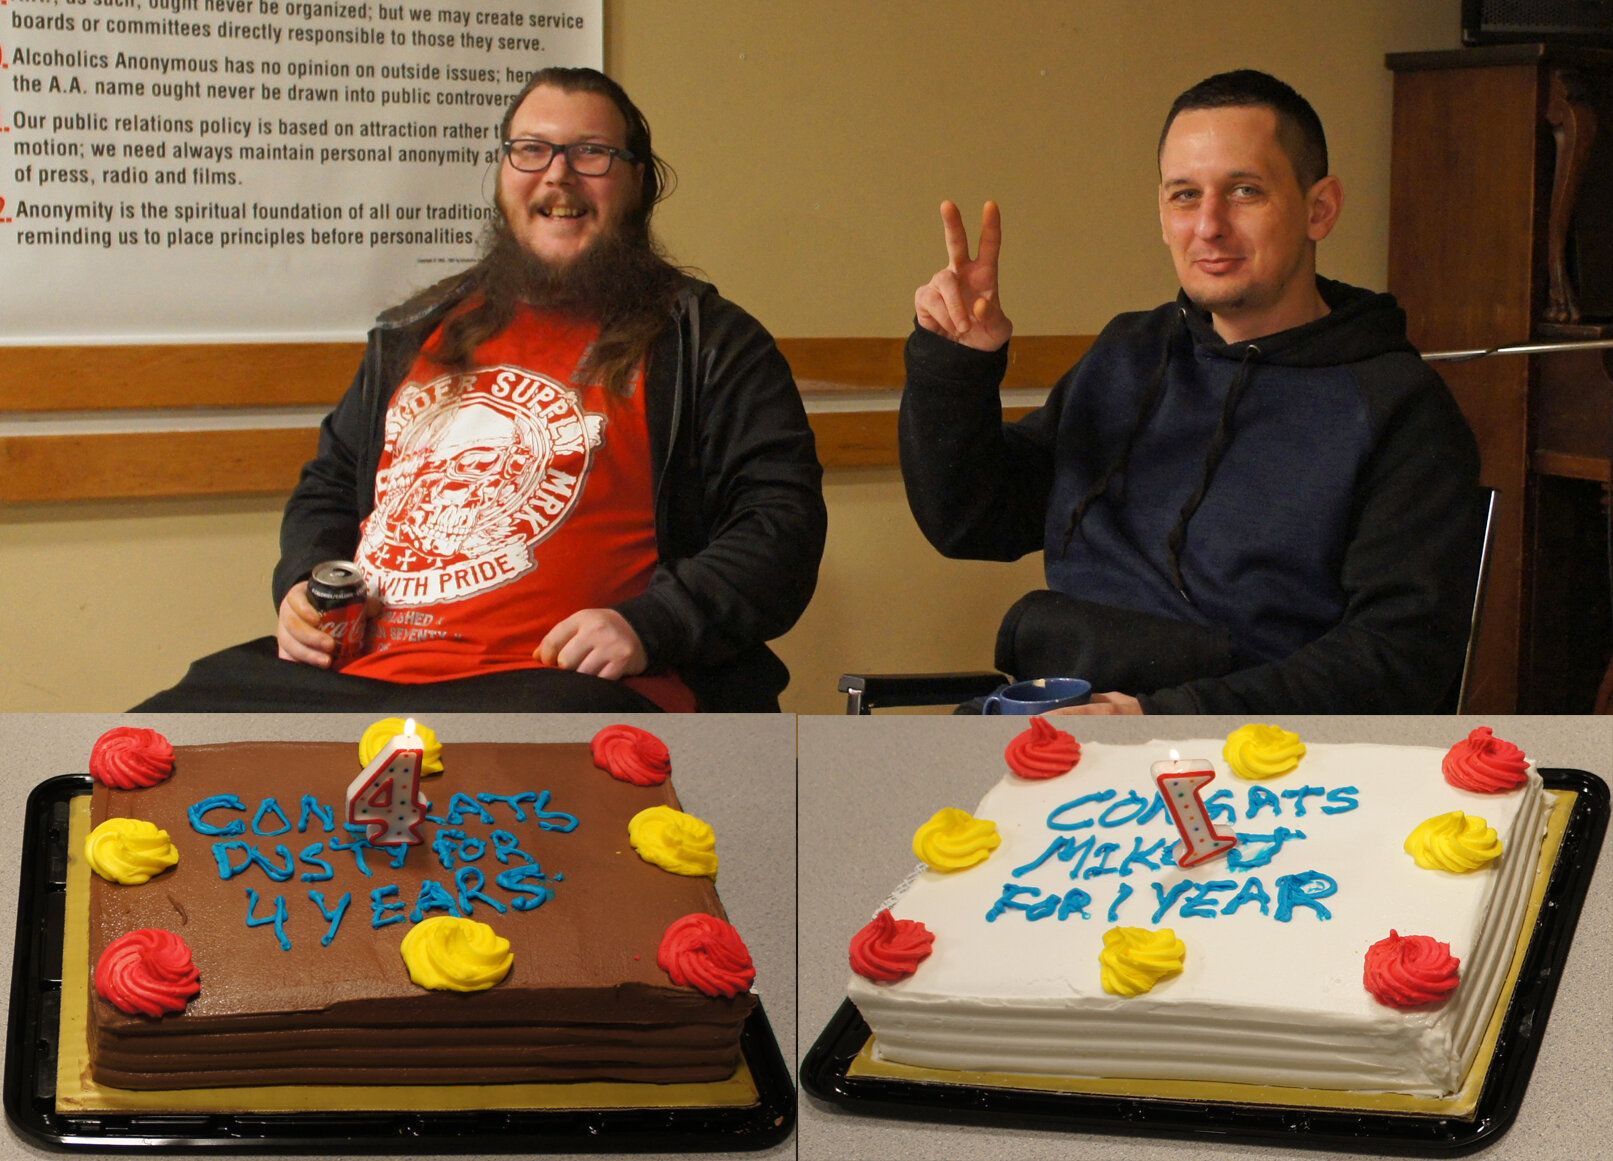 Copy of Dusty & Mike cake smiling with cakes.jpg